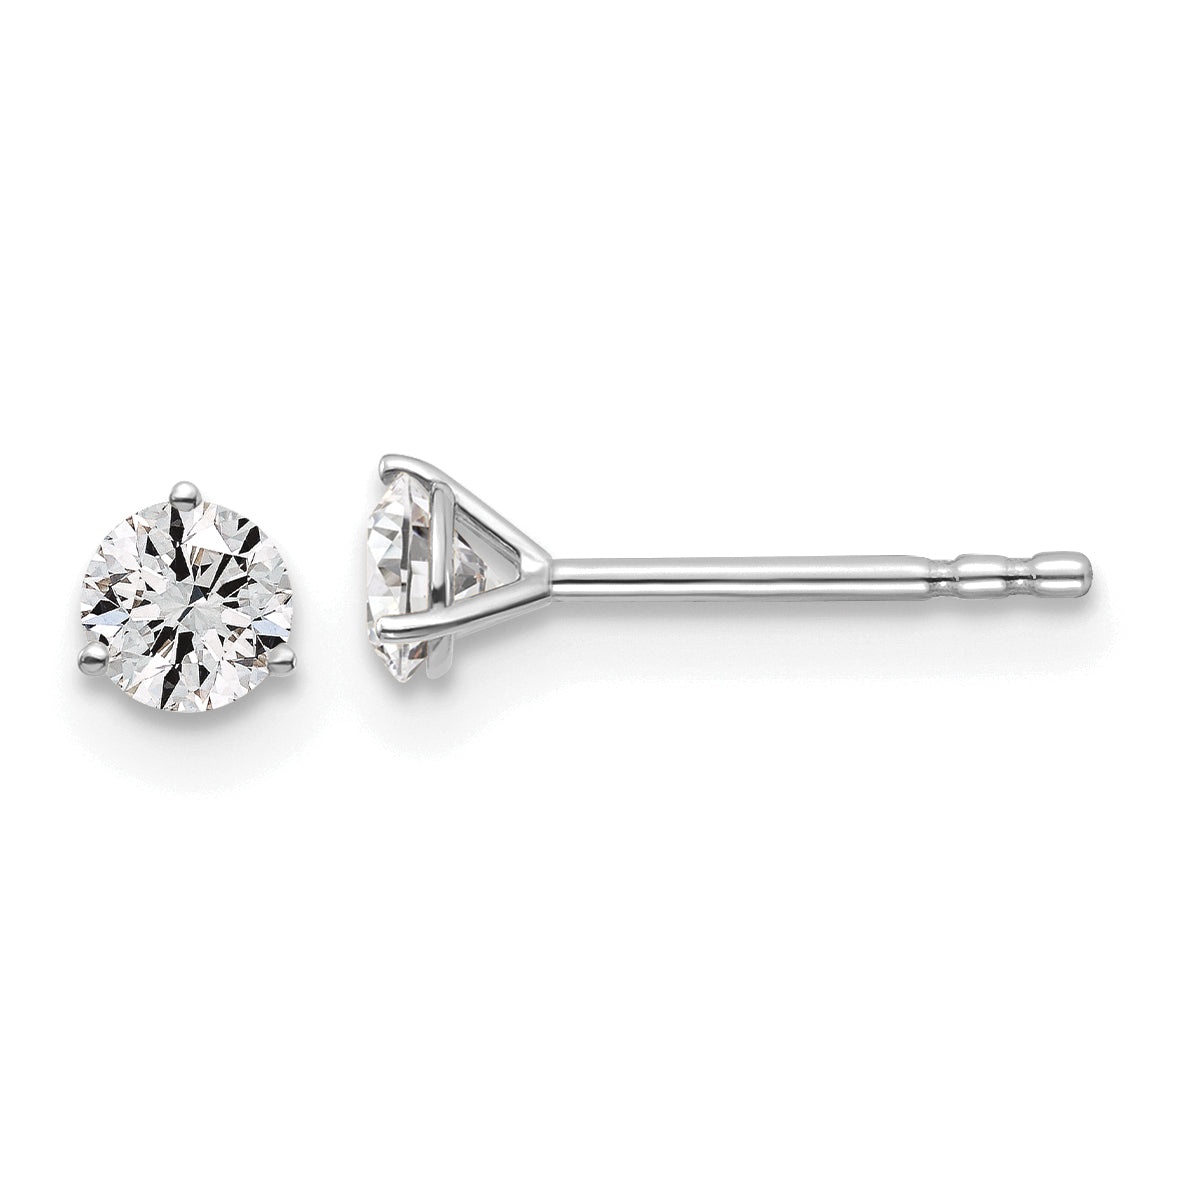 14k White Gold 3/8 carat total weight Round VS/SI DEF Lab Grown Diamond 3 Prong Stud Post Earrings